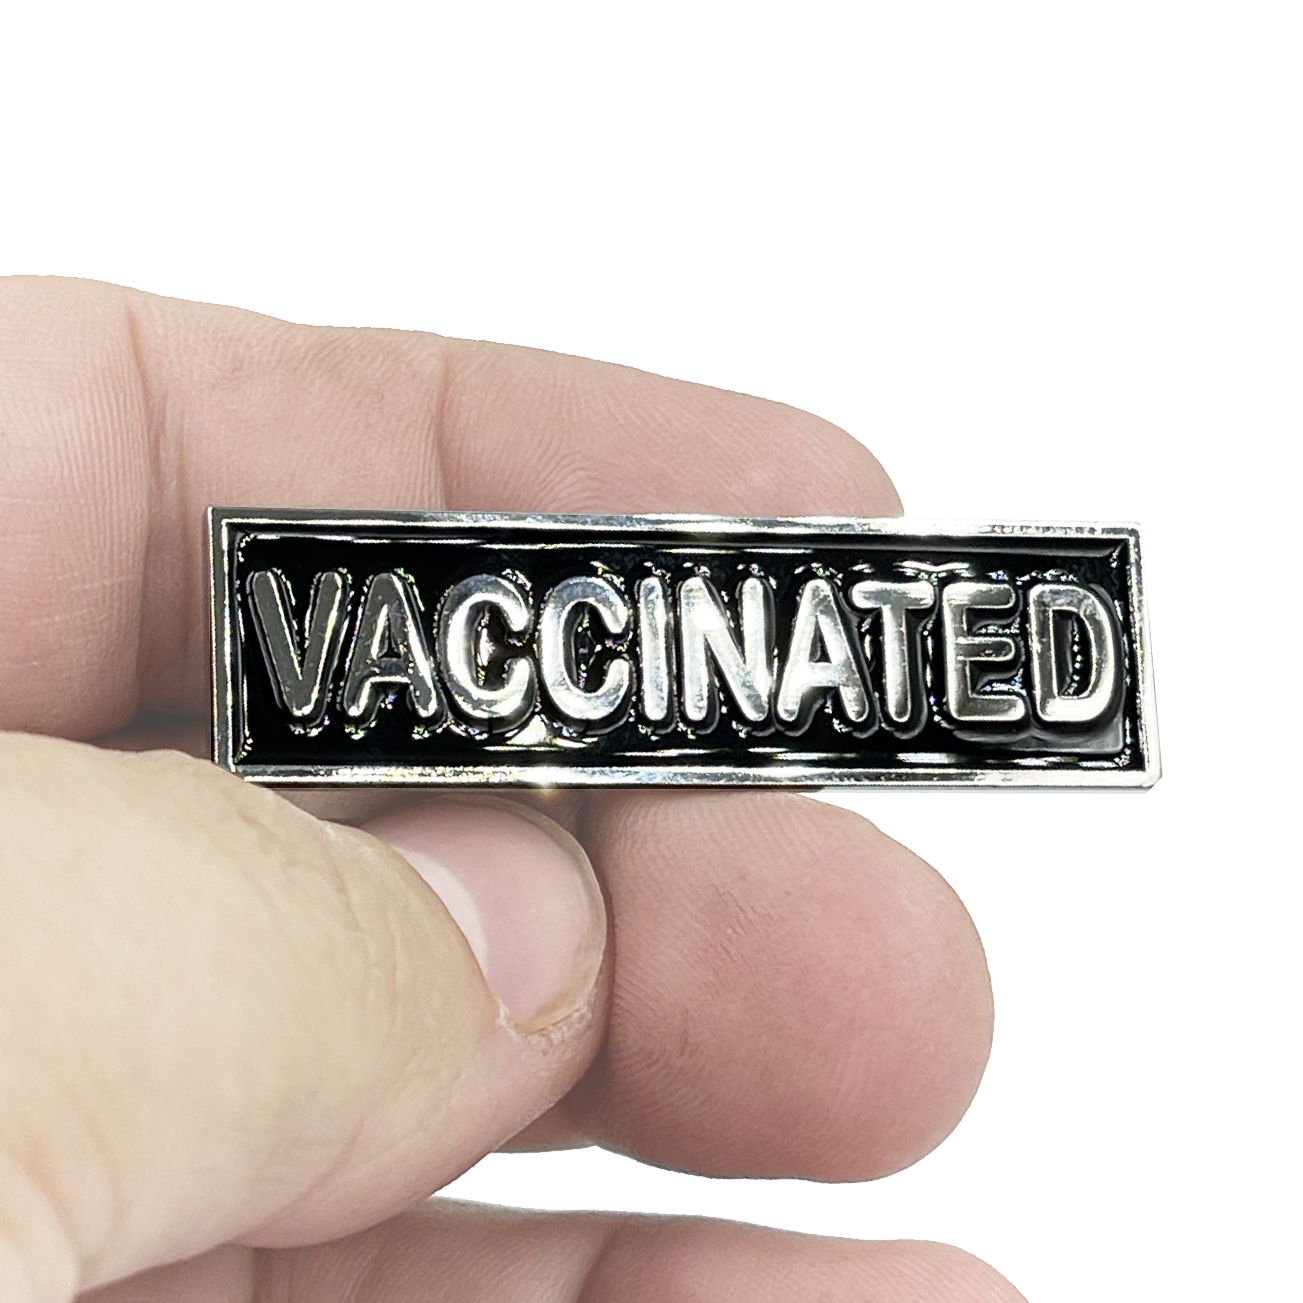 EL2-006 VACCINATED Commendation Bar Pin Pandemic Operation Warp Speed Police First Responder Nurse Doctor EMT Fire Fighter Military